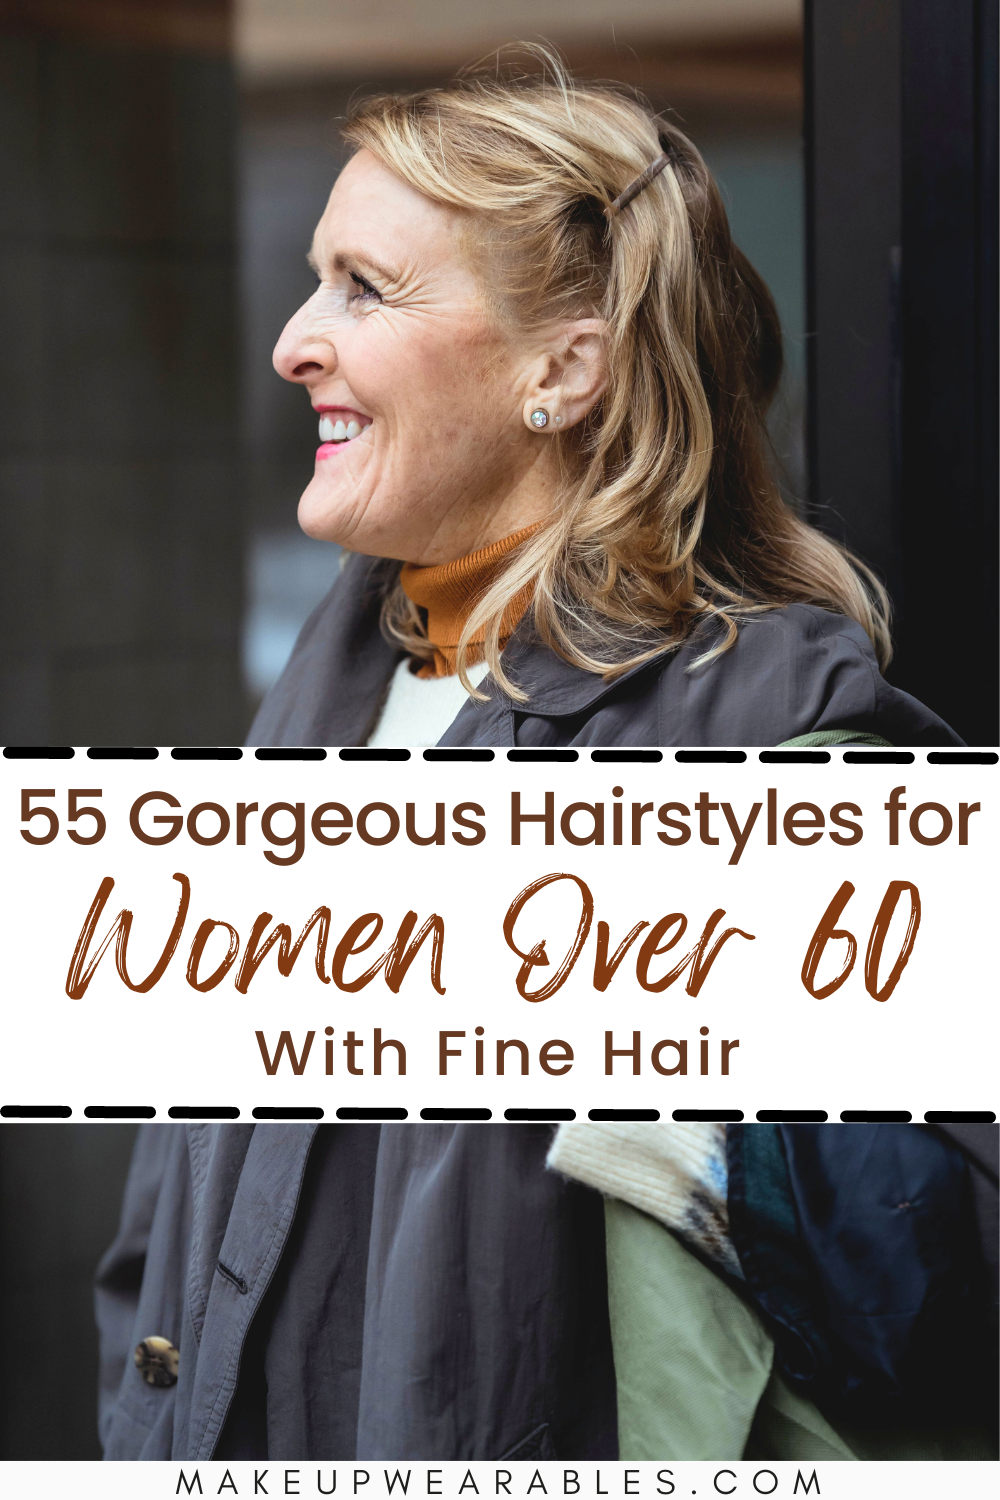 Hairstyles For Women Over 60 With Fine Hair - Makeup Wearables